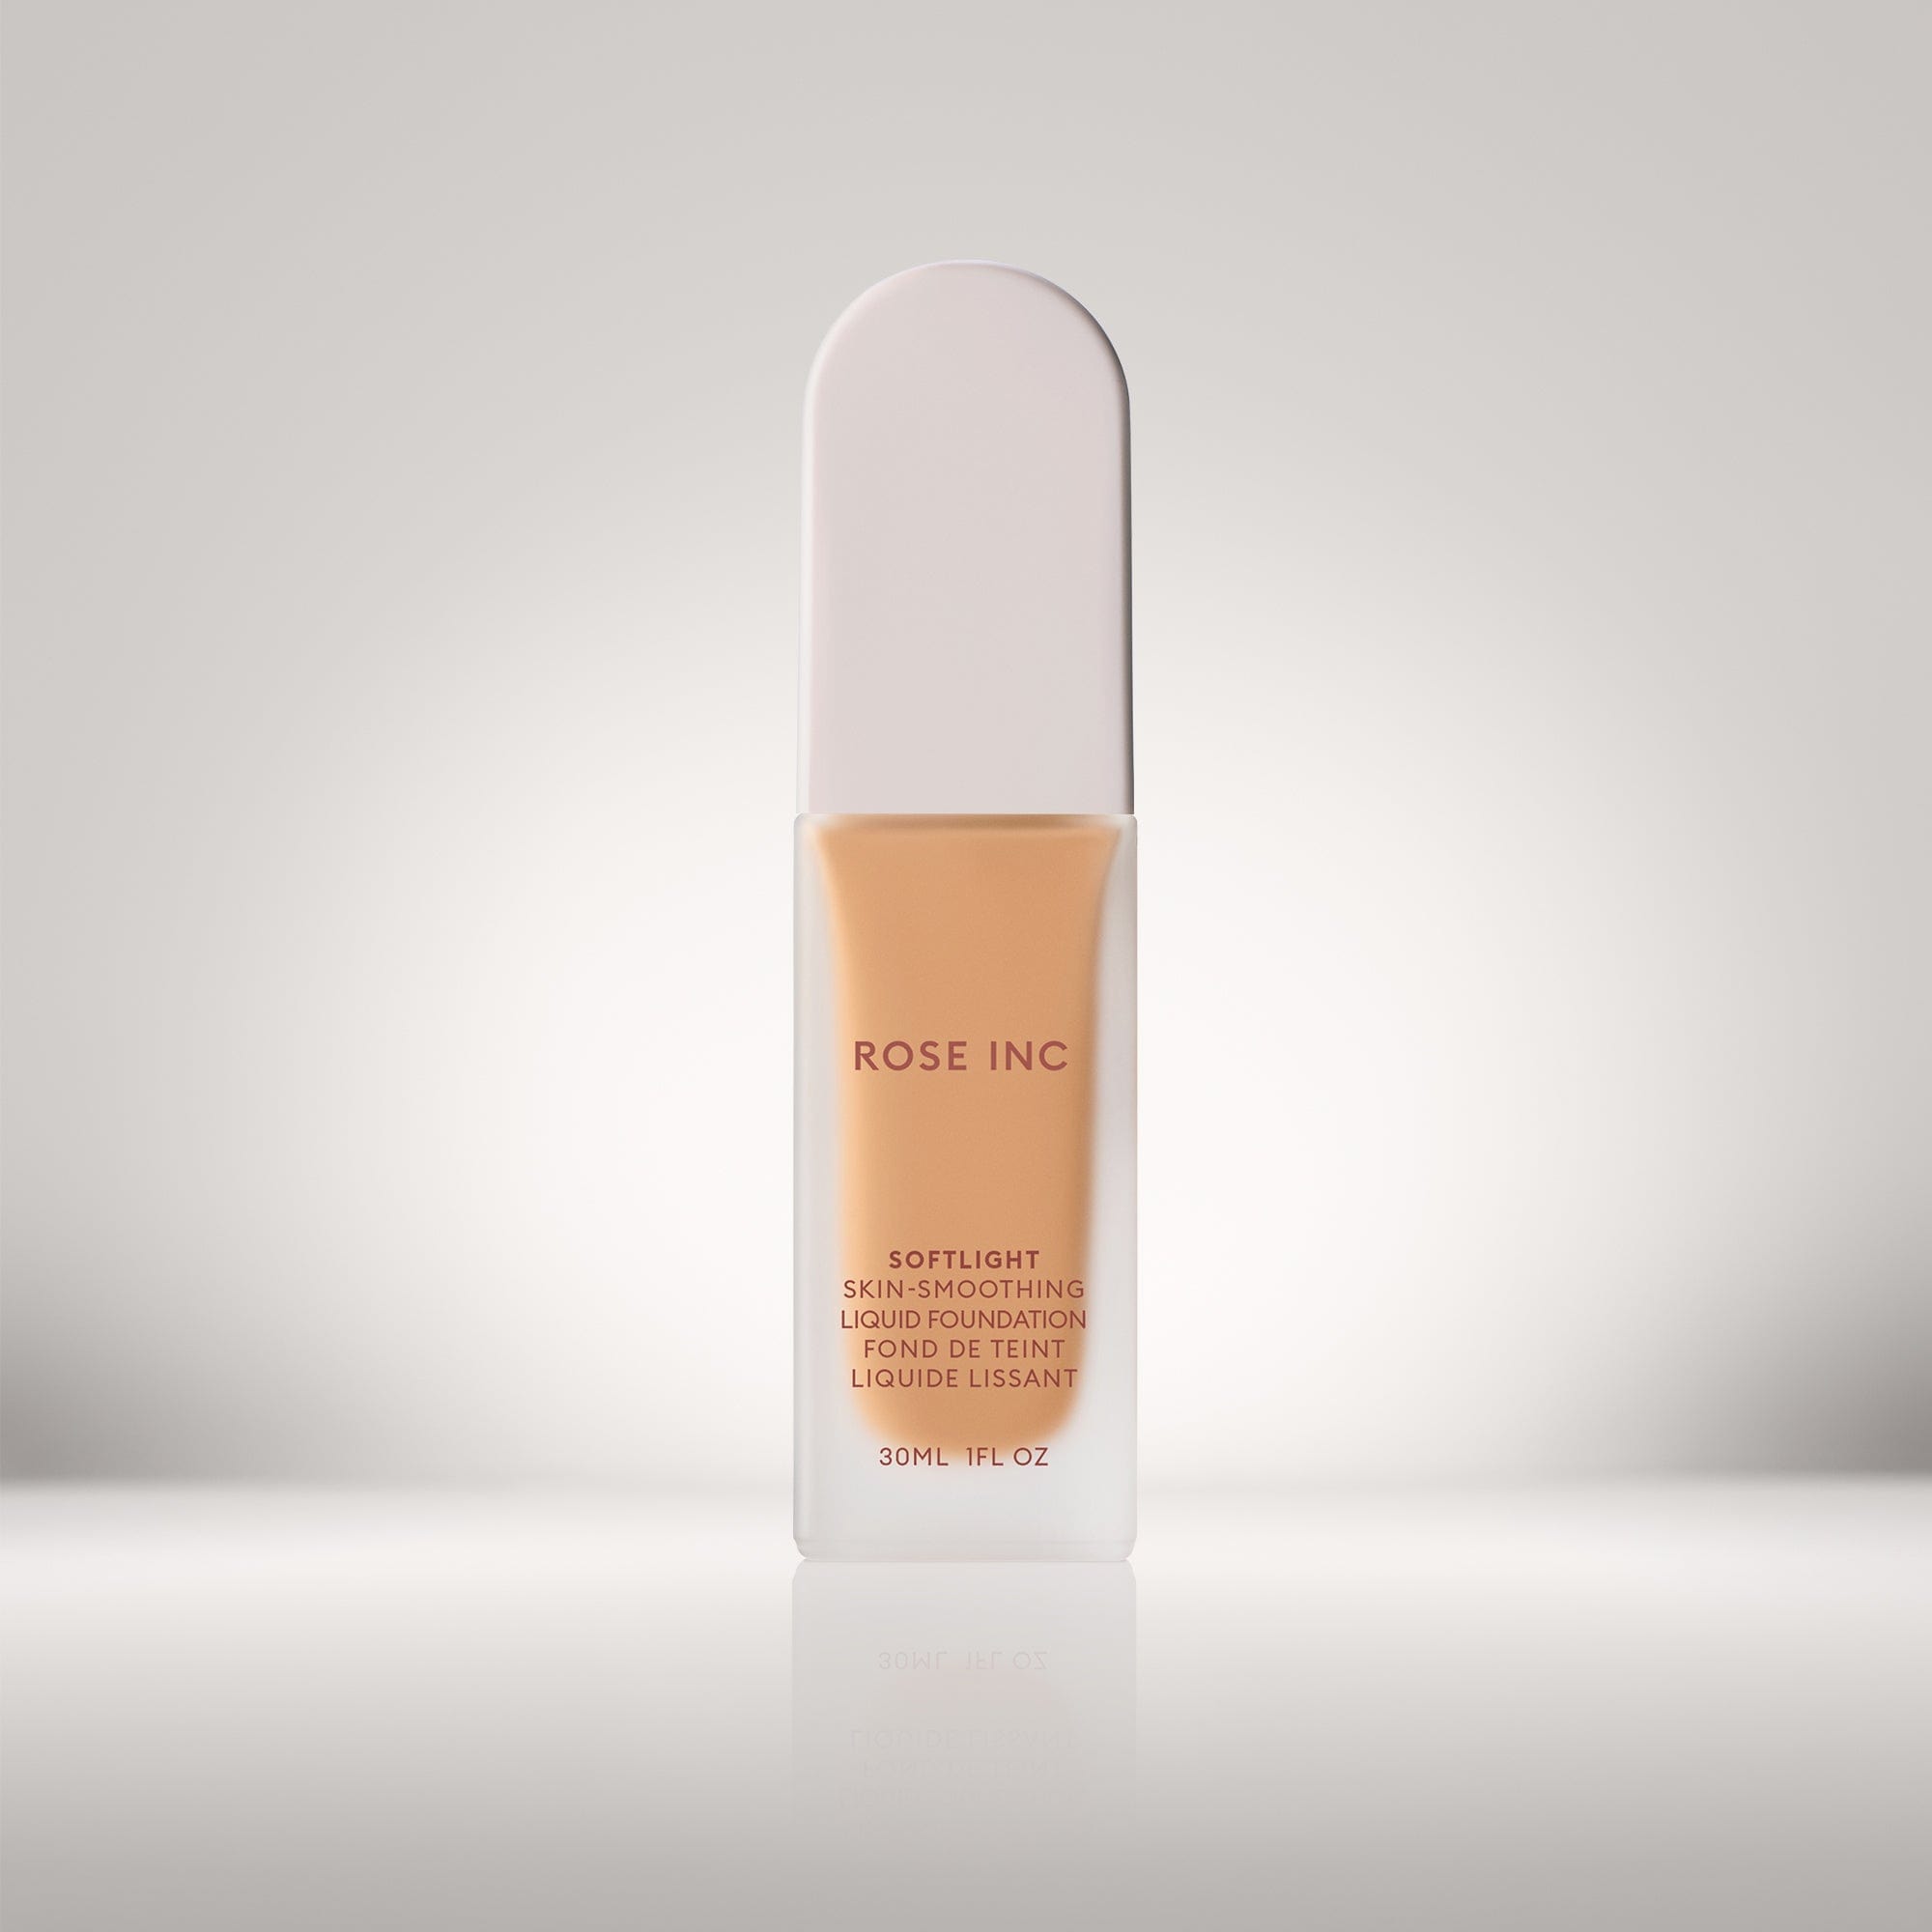 Soldier image of shade 18W in Softlight Smoothing Foundation